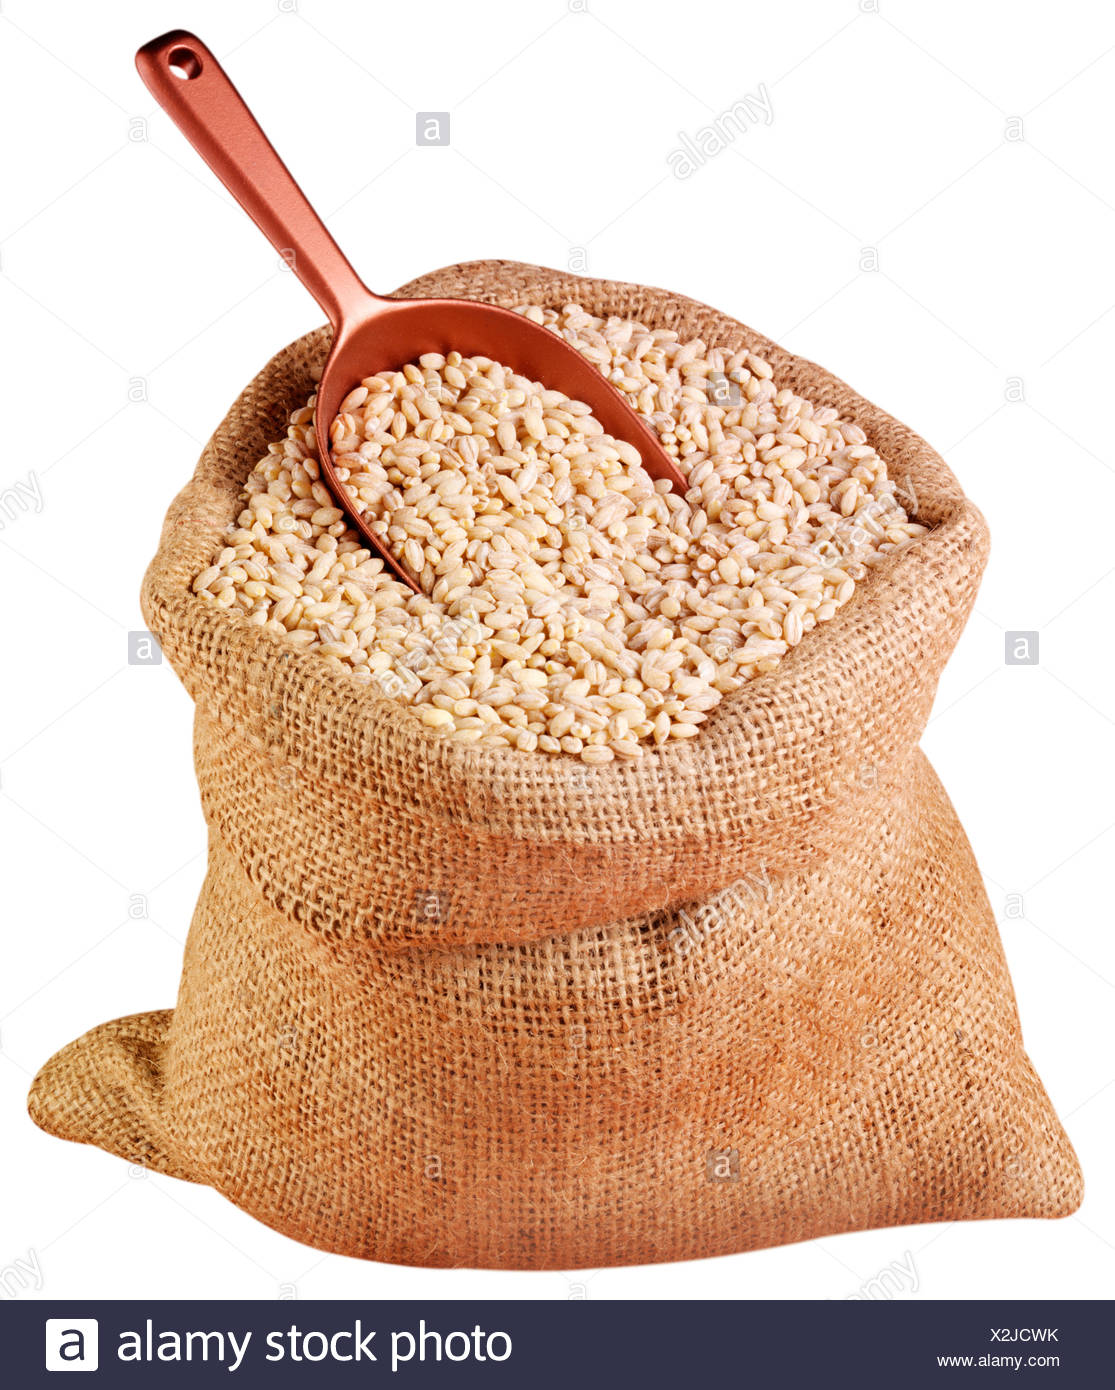 Download Sack Of Pearl Barley Cut Out Stock Photo Alamy Yellowimages Mockups